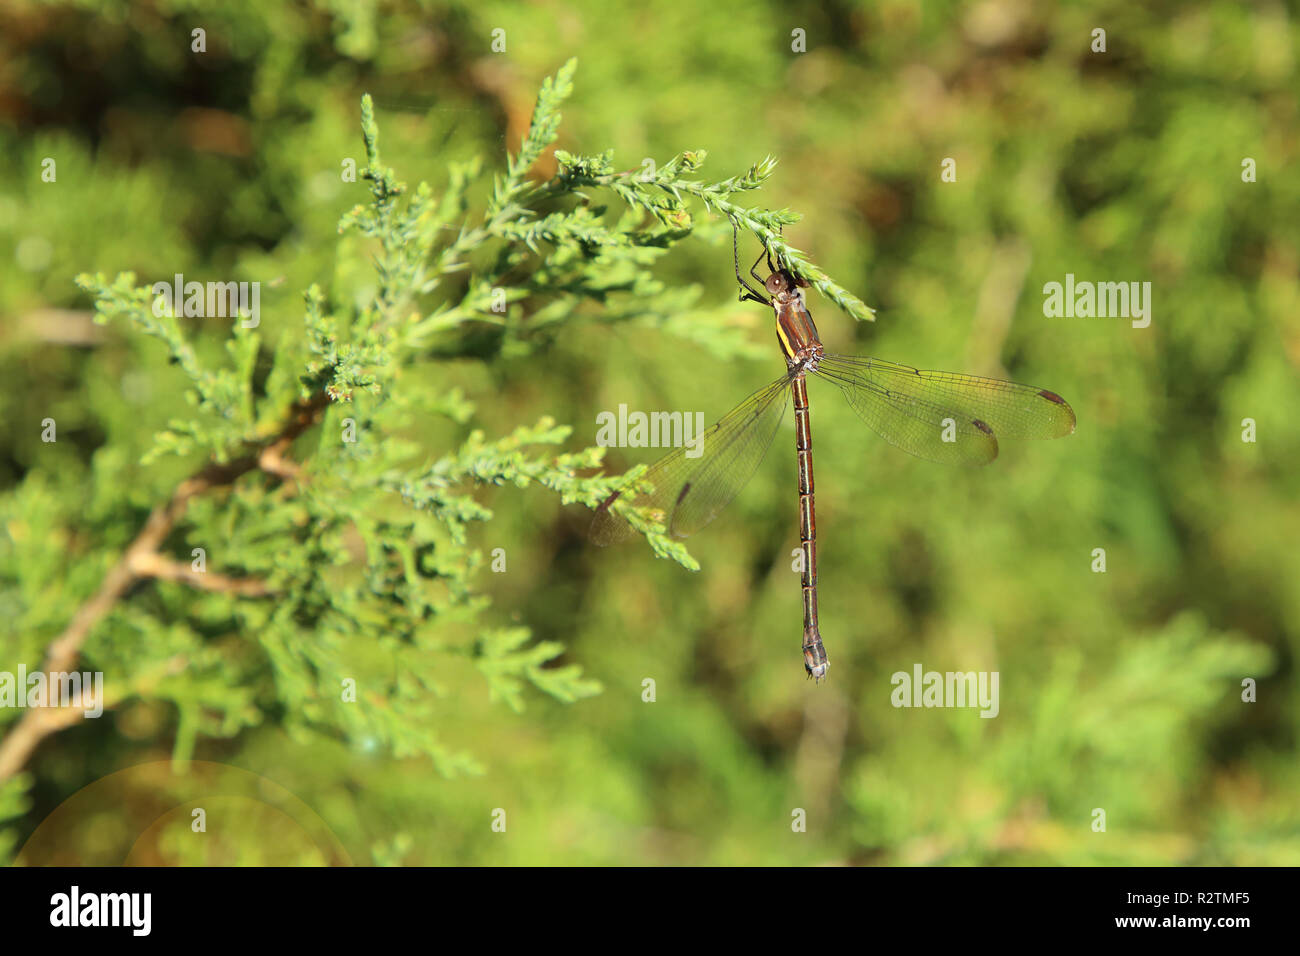 Dragonfly is hanging on a tree branch Stock Photo